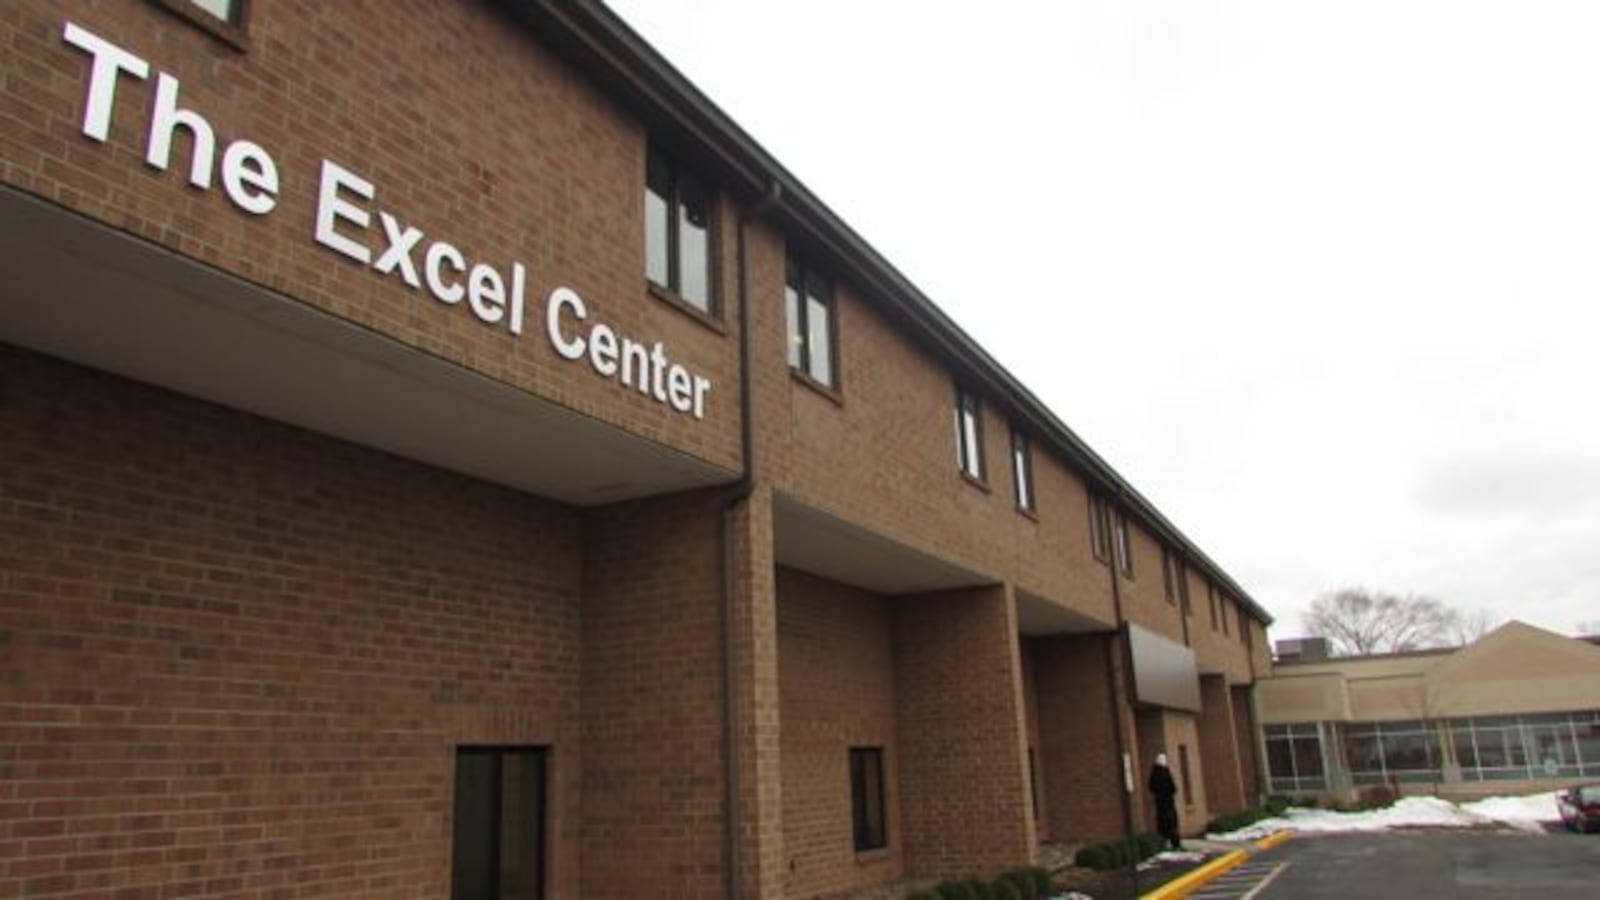 The Excel Center on Michigan Street in Indianapolis is part of a network of dropout recovery charter high schools that serves adults across the state.